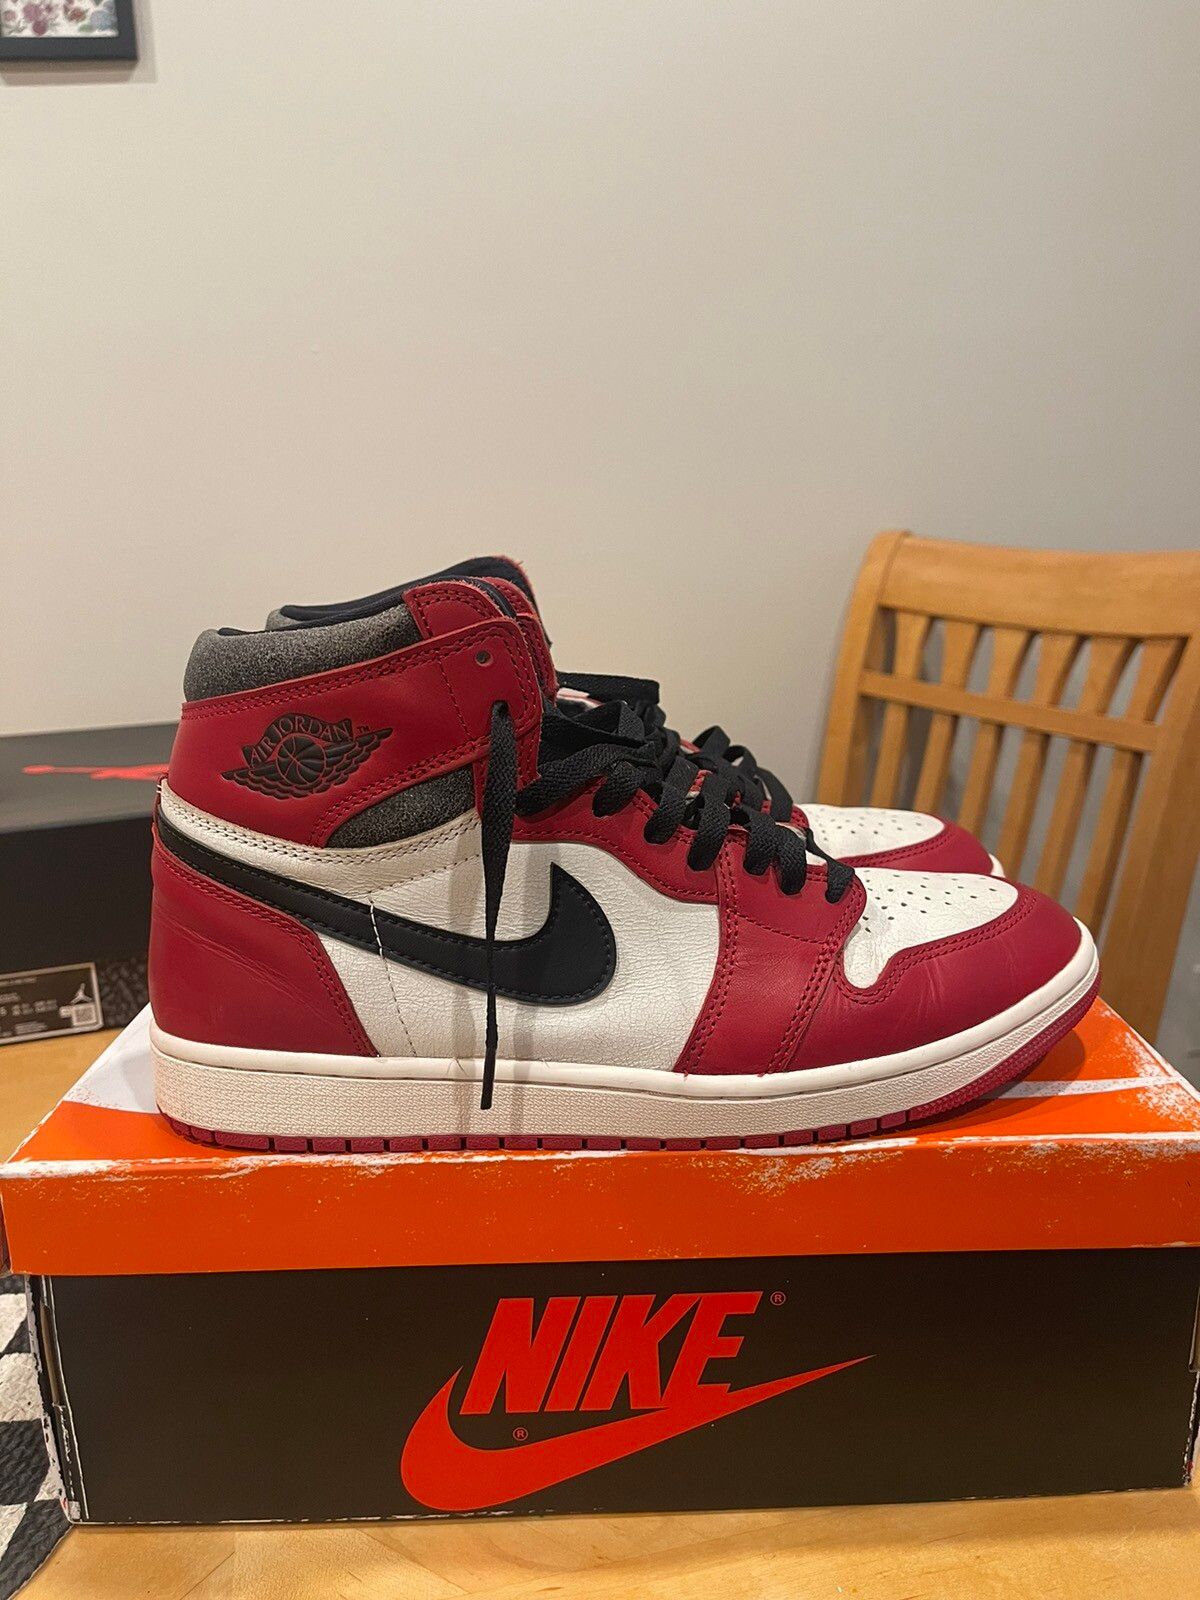 Nike Air Jordan 1 - Chicago “Lost & Found” Size US 10.5 / EU 43-44 - 1 Preview